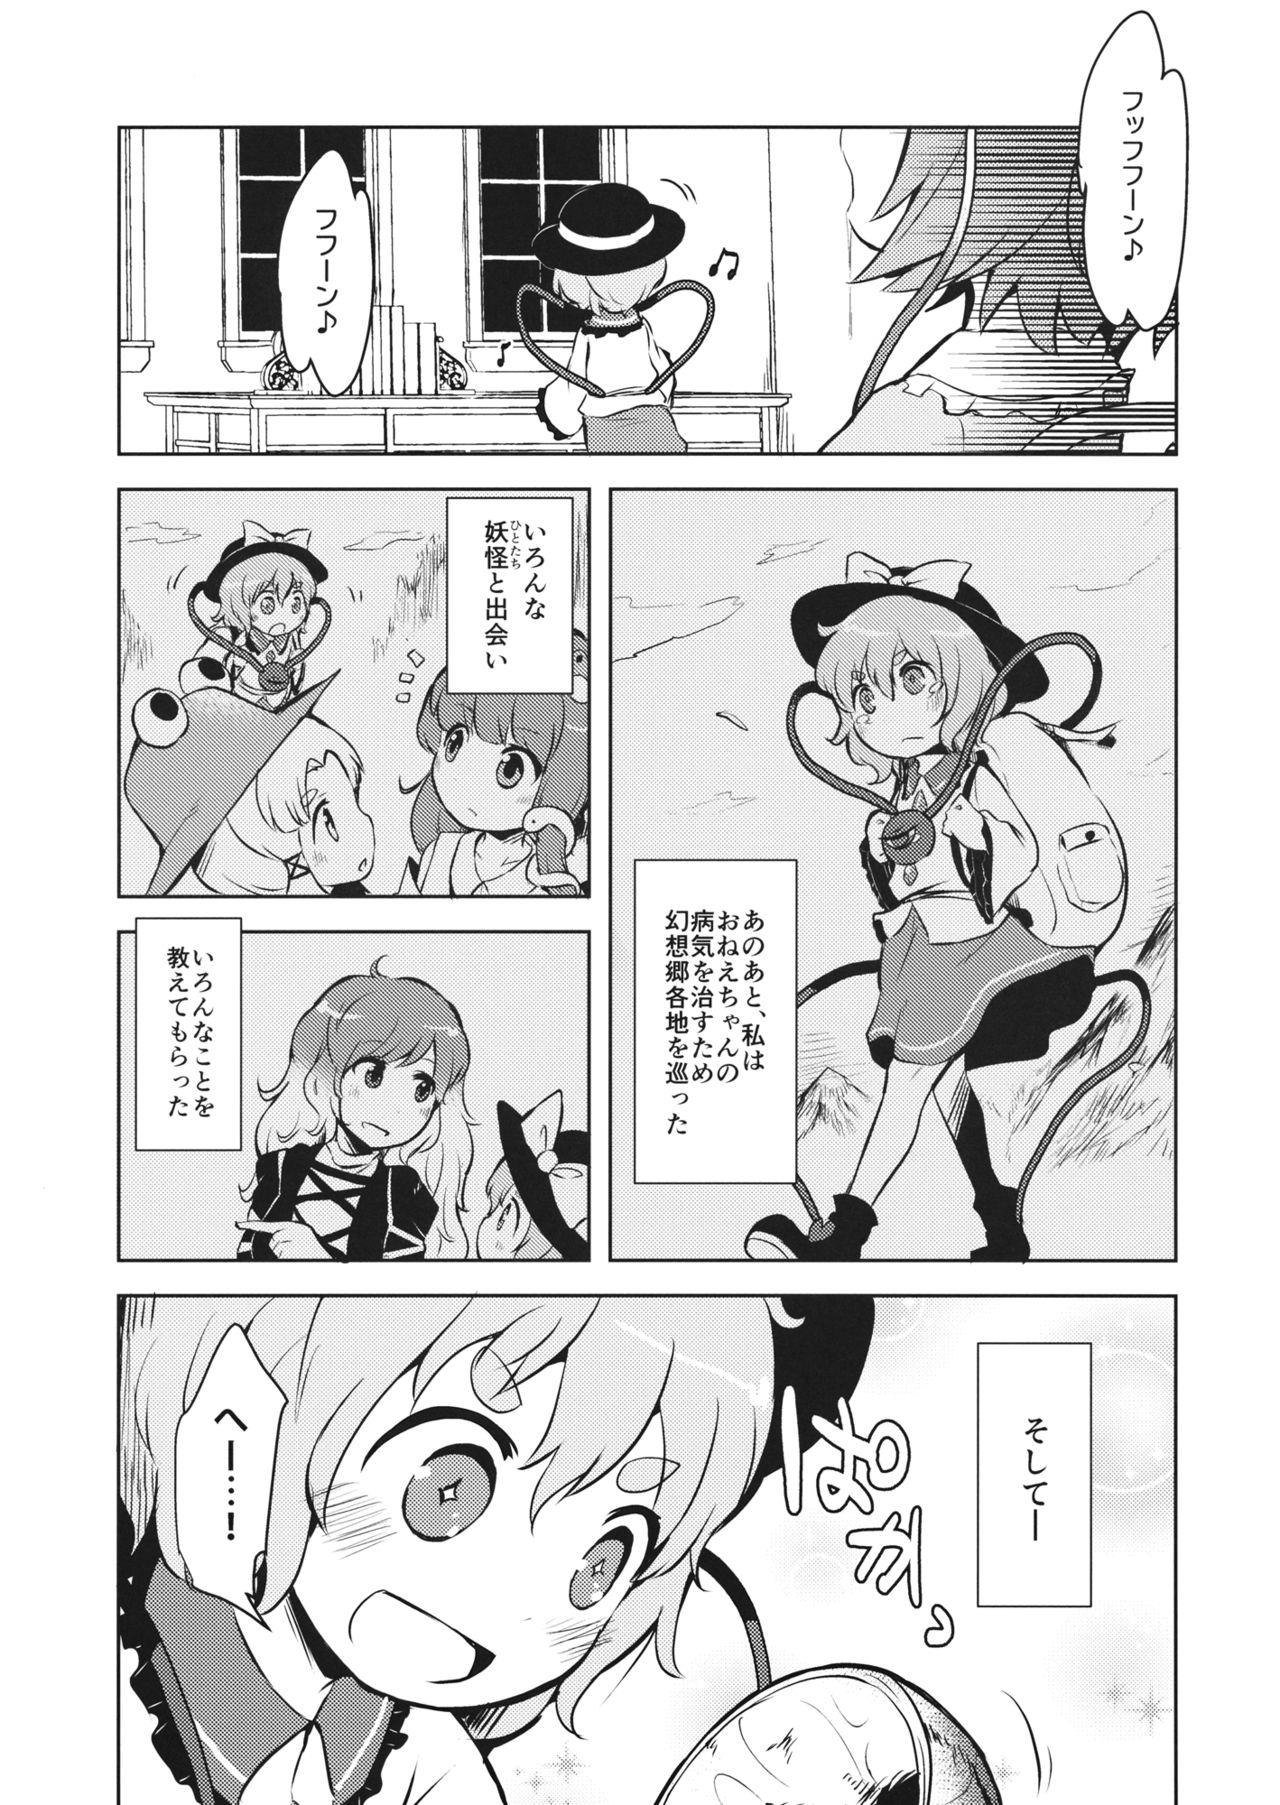 Blowjob FREAKS OUT! - Touhou project Gayporn - Page 8